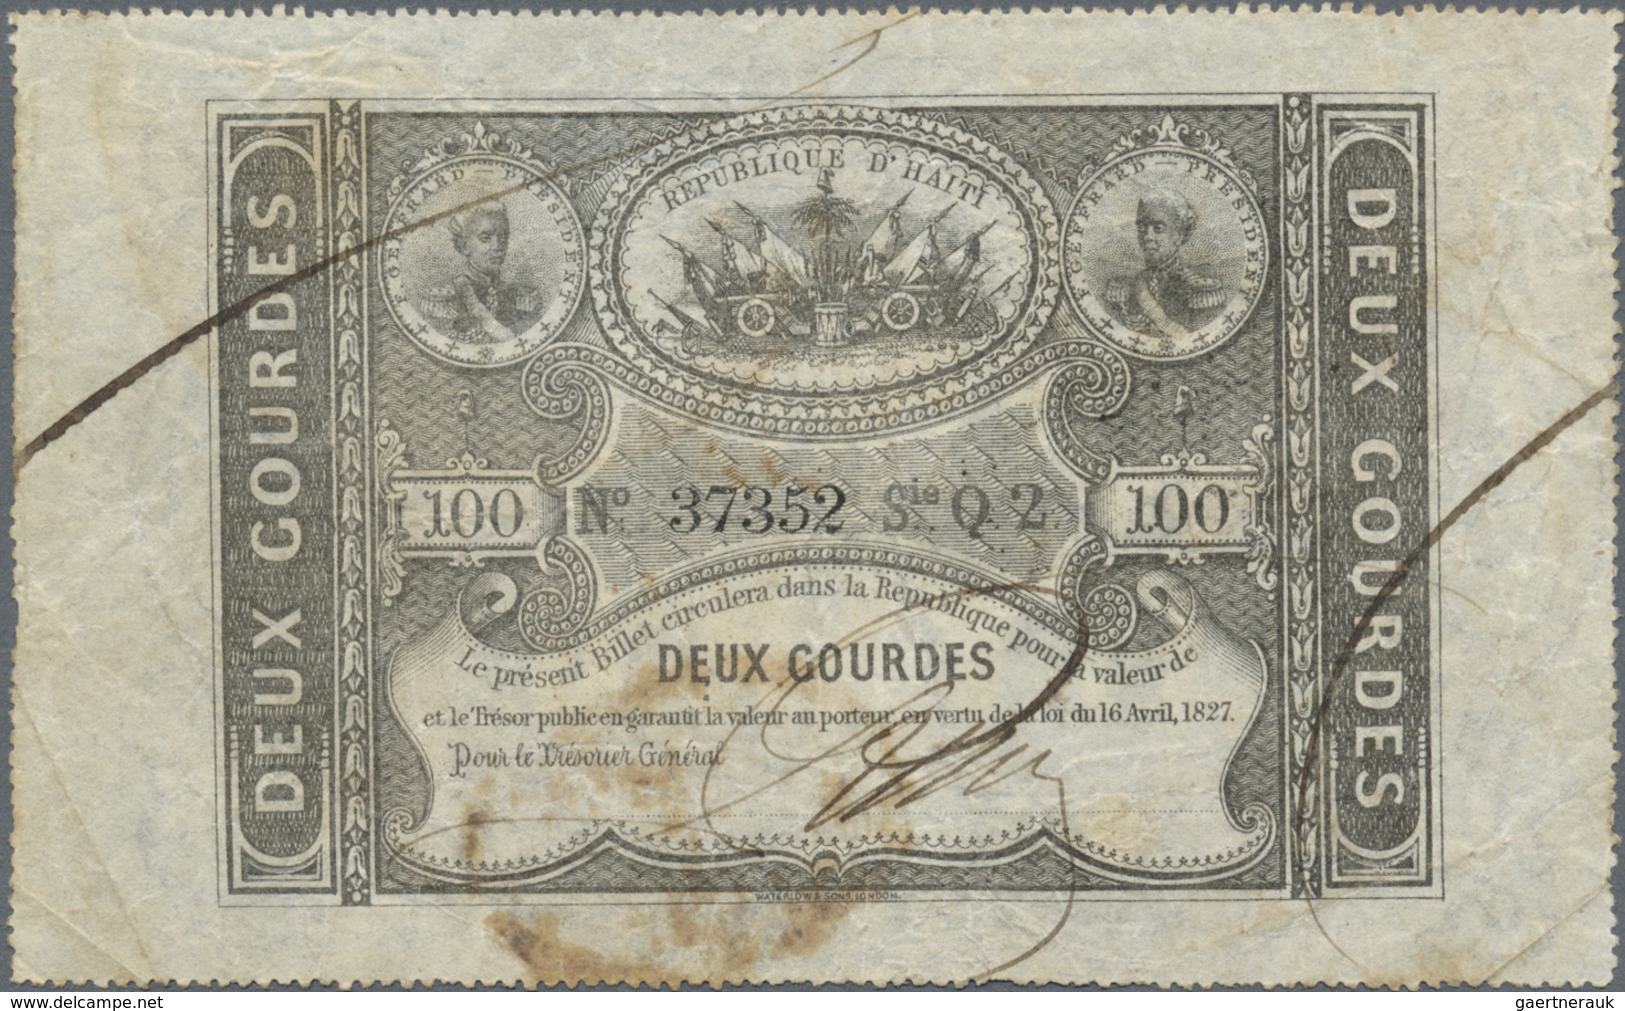 Haiti: 2 Gourdes 1827 P. 42, Used With Folds, Stamped On Back, No Holes Or Tears, Condition: F+. - Haiti